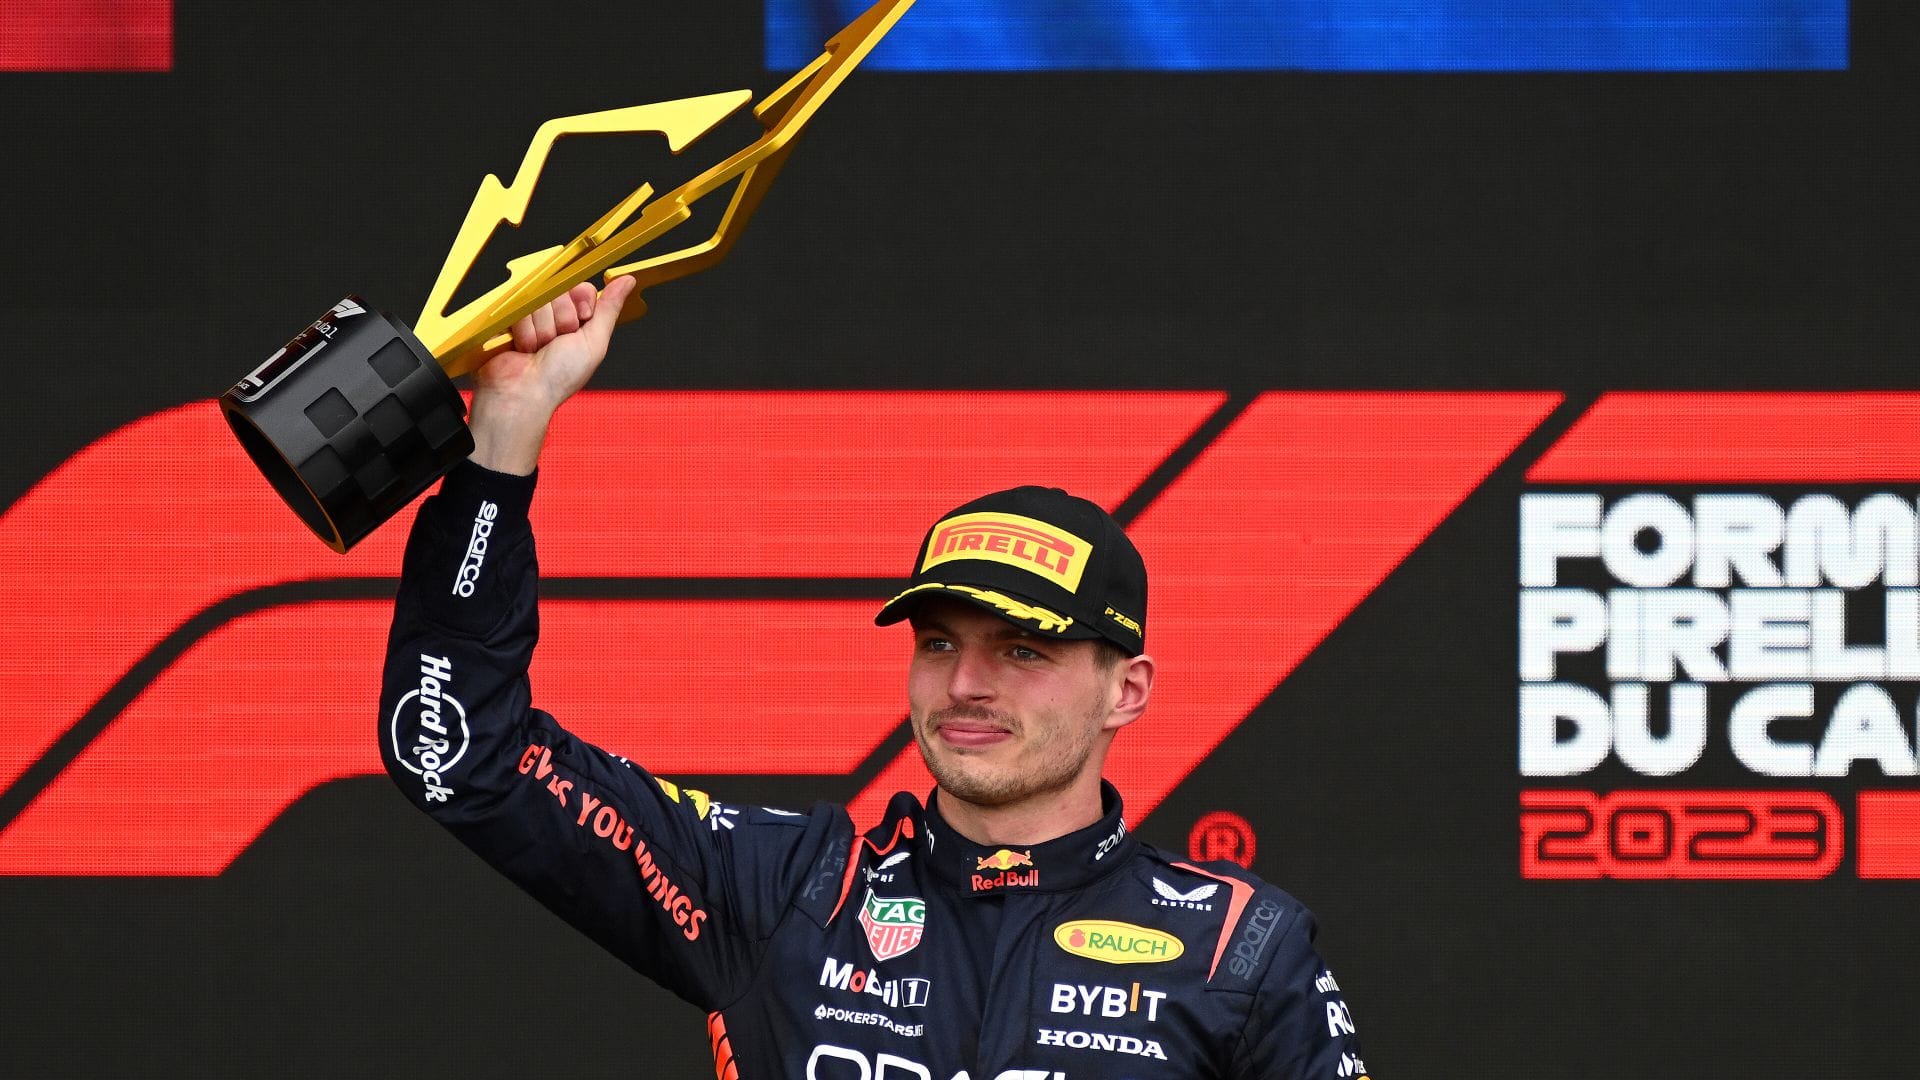 Max Verstappen Wins Canadian Grand Prix To Equal Senna's Win Record